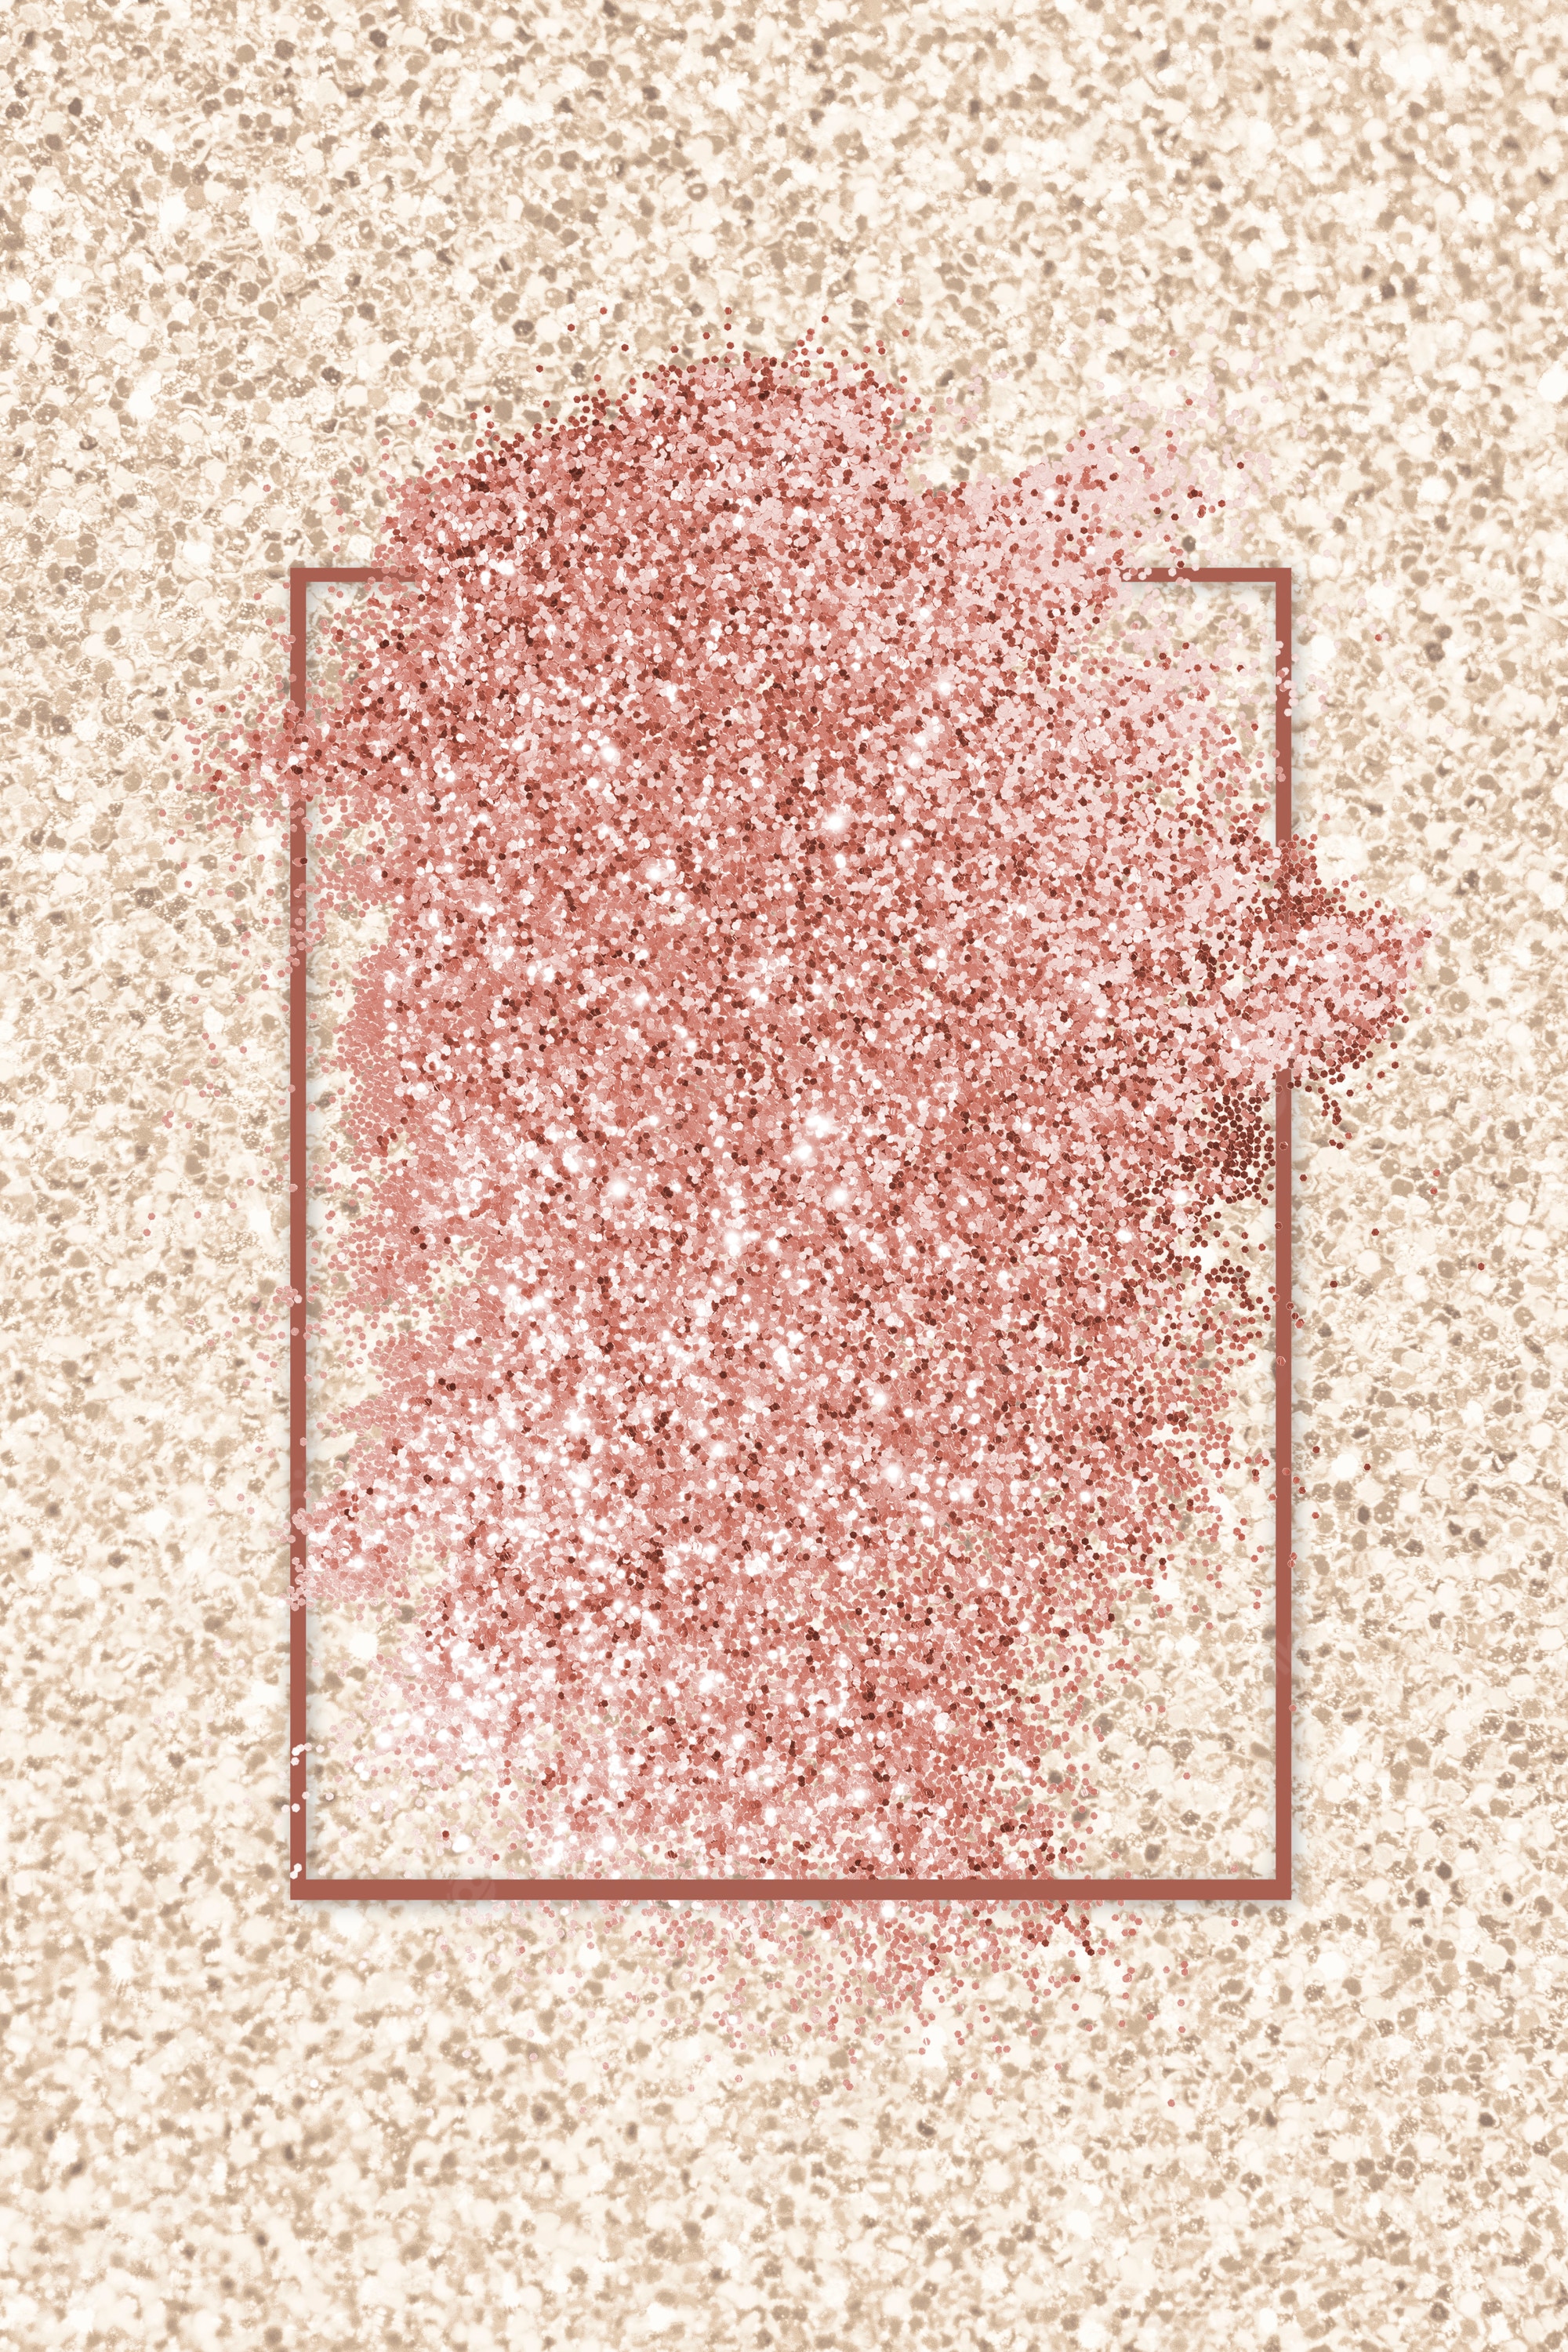 Rose Gold Glitter Background Image. Free Vectors, & PSD